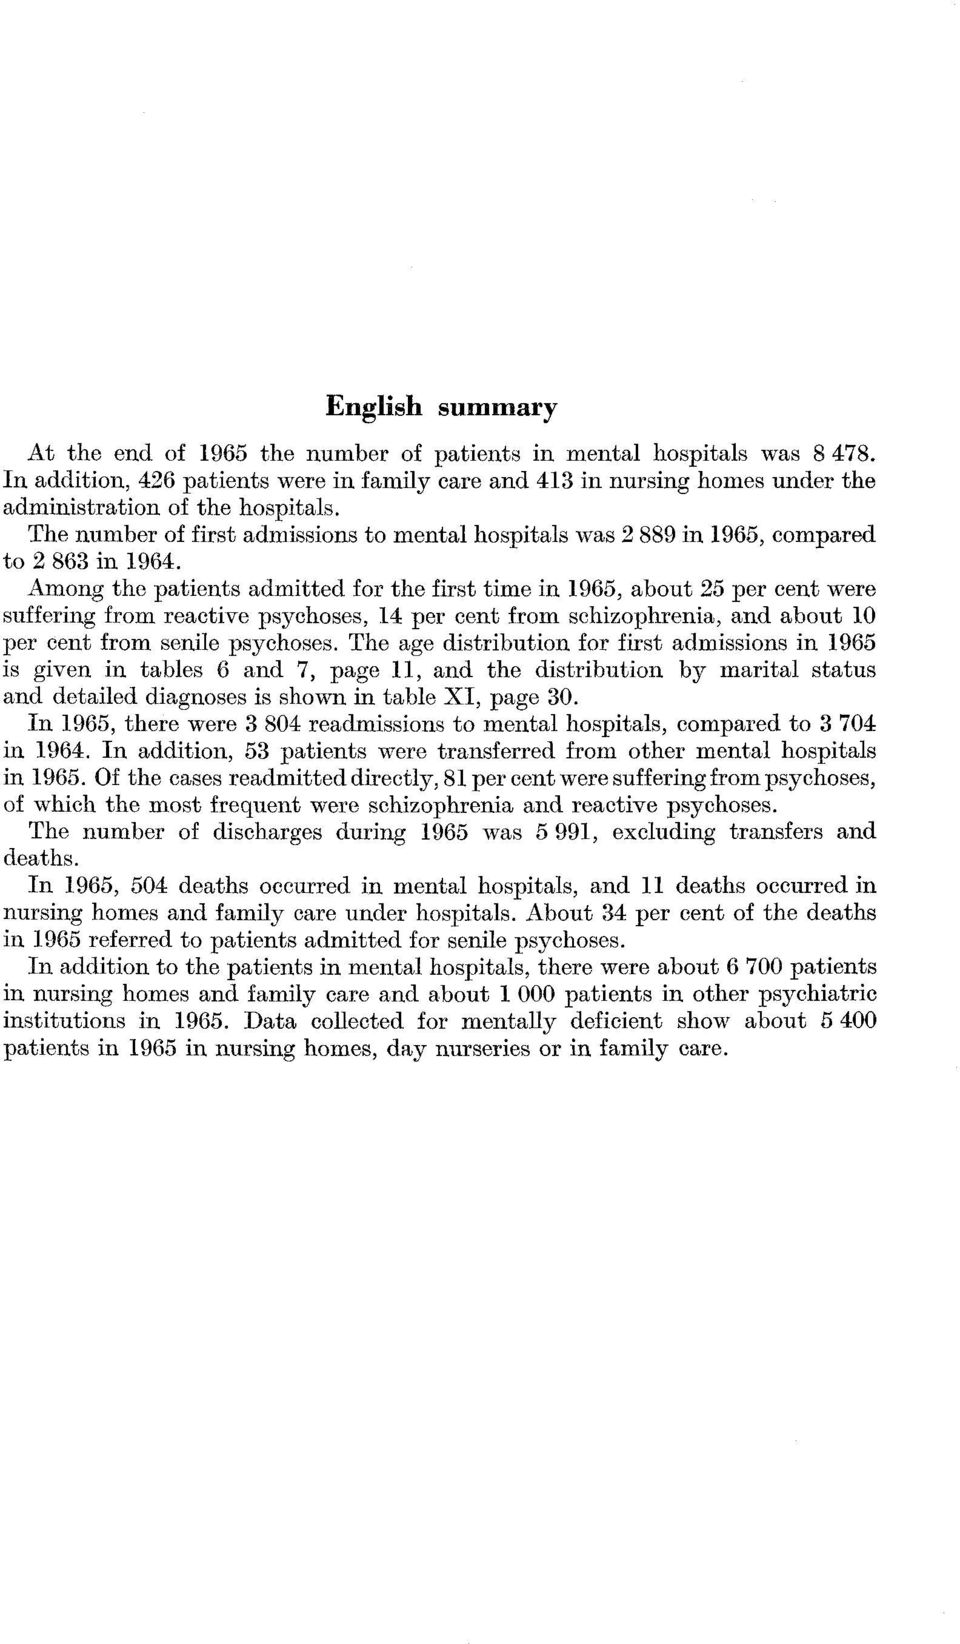 The number of first admissions to mental hospitals was 2 889 in 1965, compared to 2 863 in 1964.